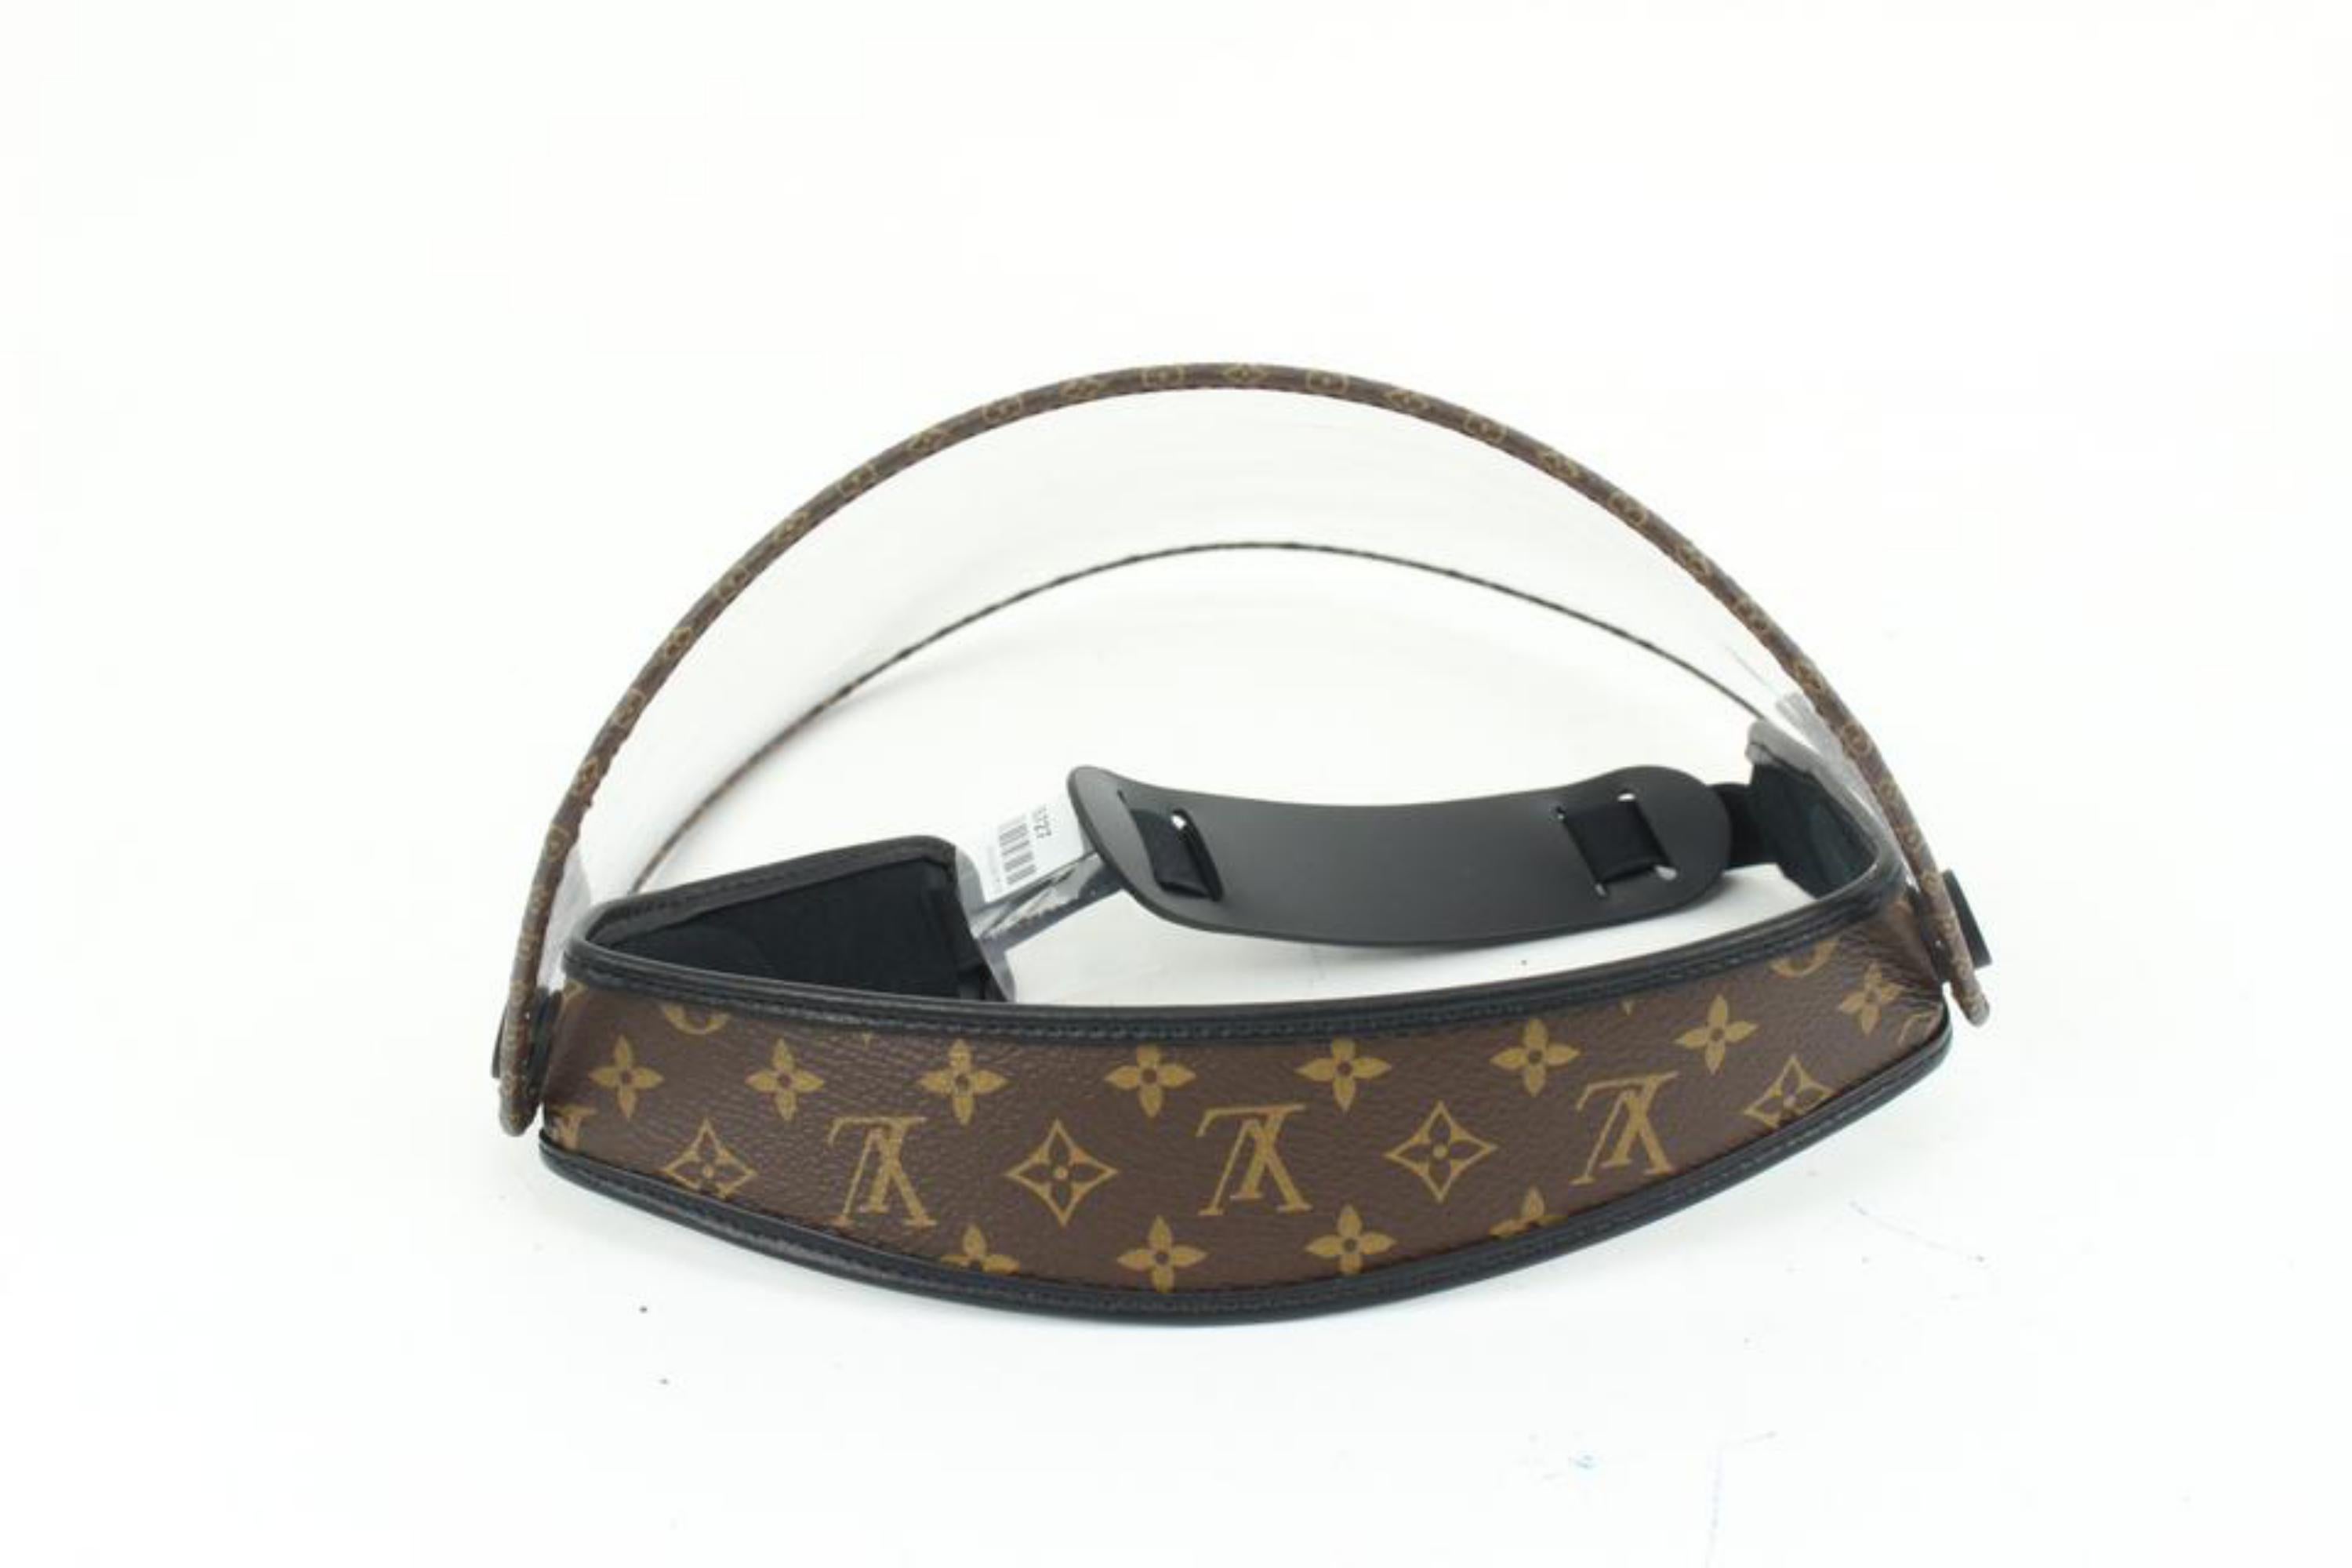 Louis Vuitton Unisex Adjustable Monogram Visor Face Mask Shield  17lk427  In New Condition For Sale In Dix hills, NY